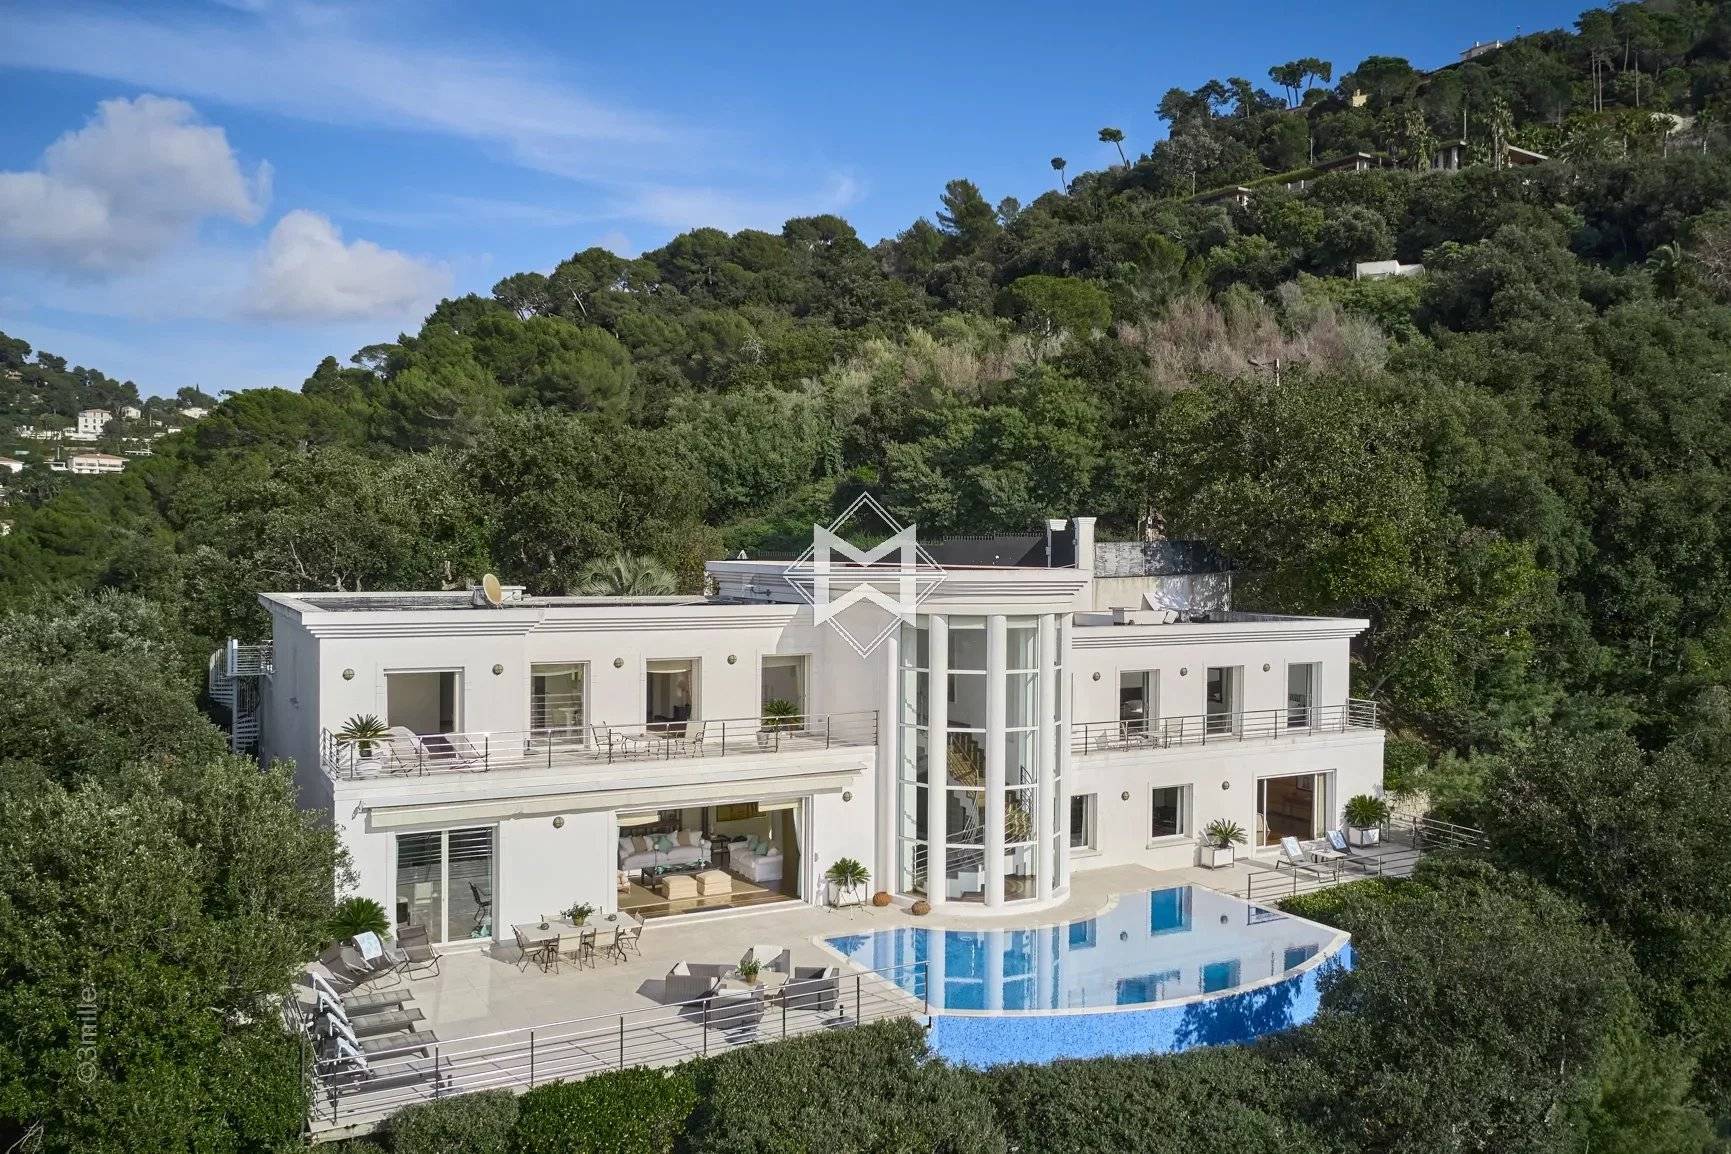 CANNES CALIFORNIA - Beautiful property overlooking the bay of Cannes